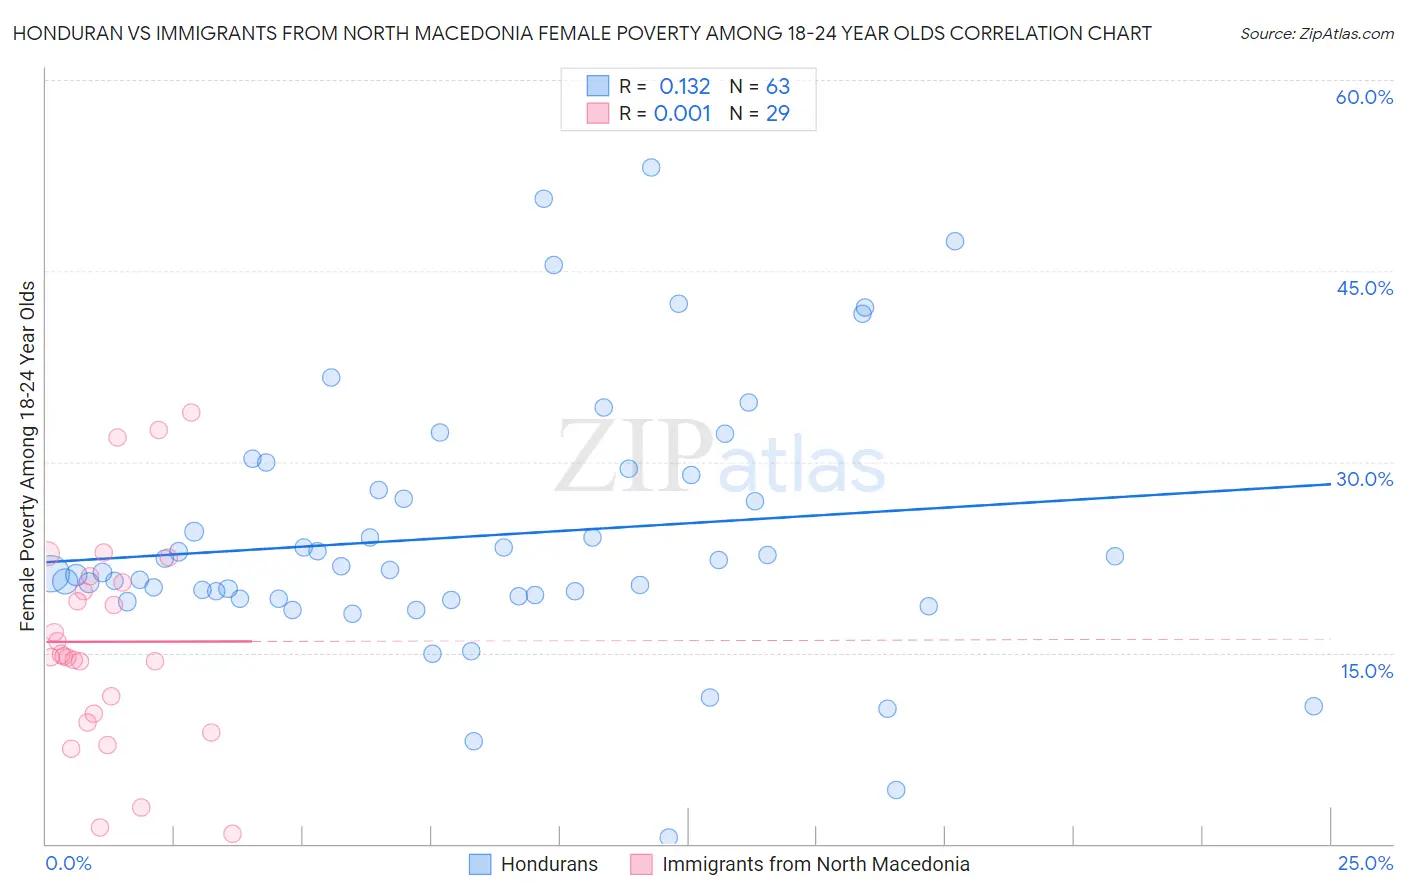 Honduran vs Immigrants from North Macedonia Female Poverty Among 18-24 Year Olds